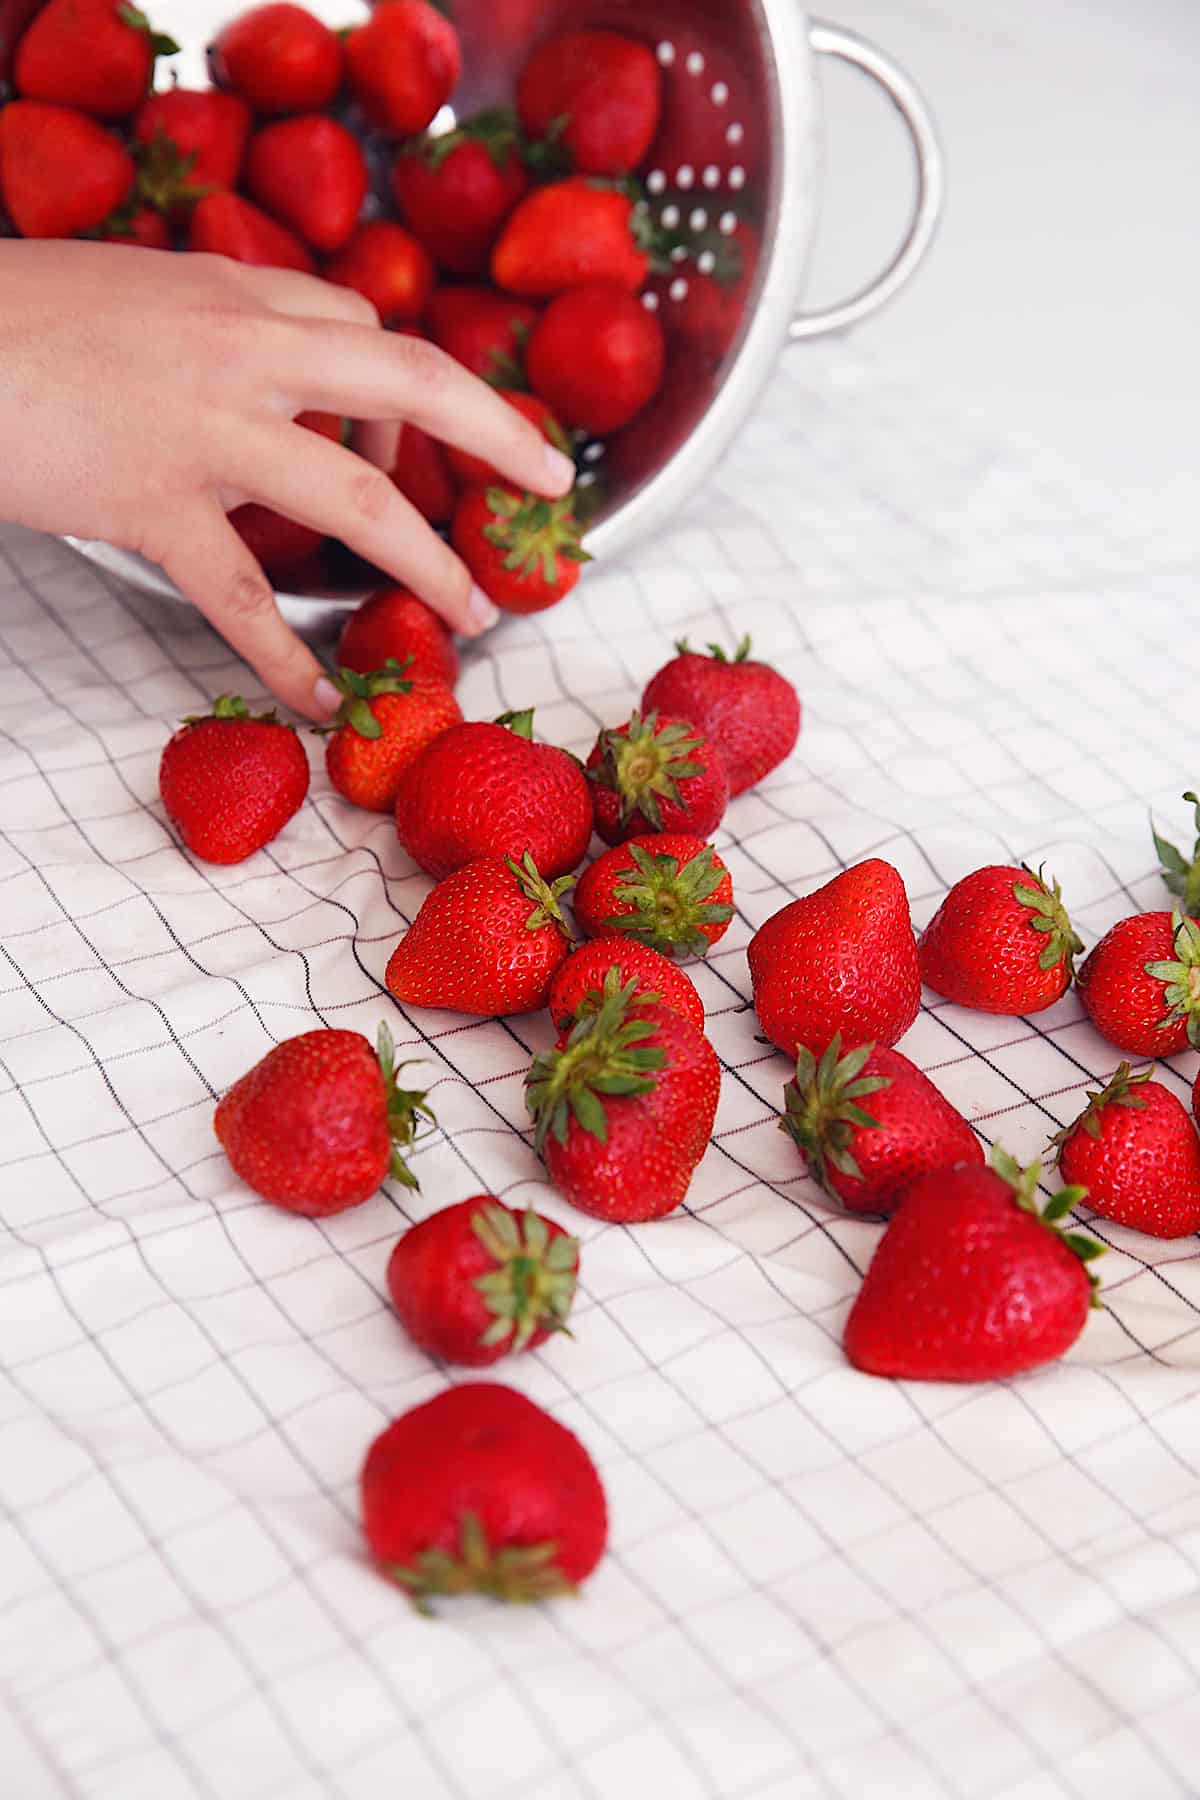 How To Clean Strawberries8 